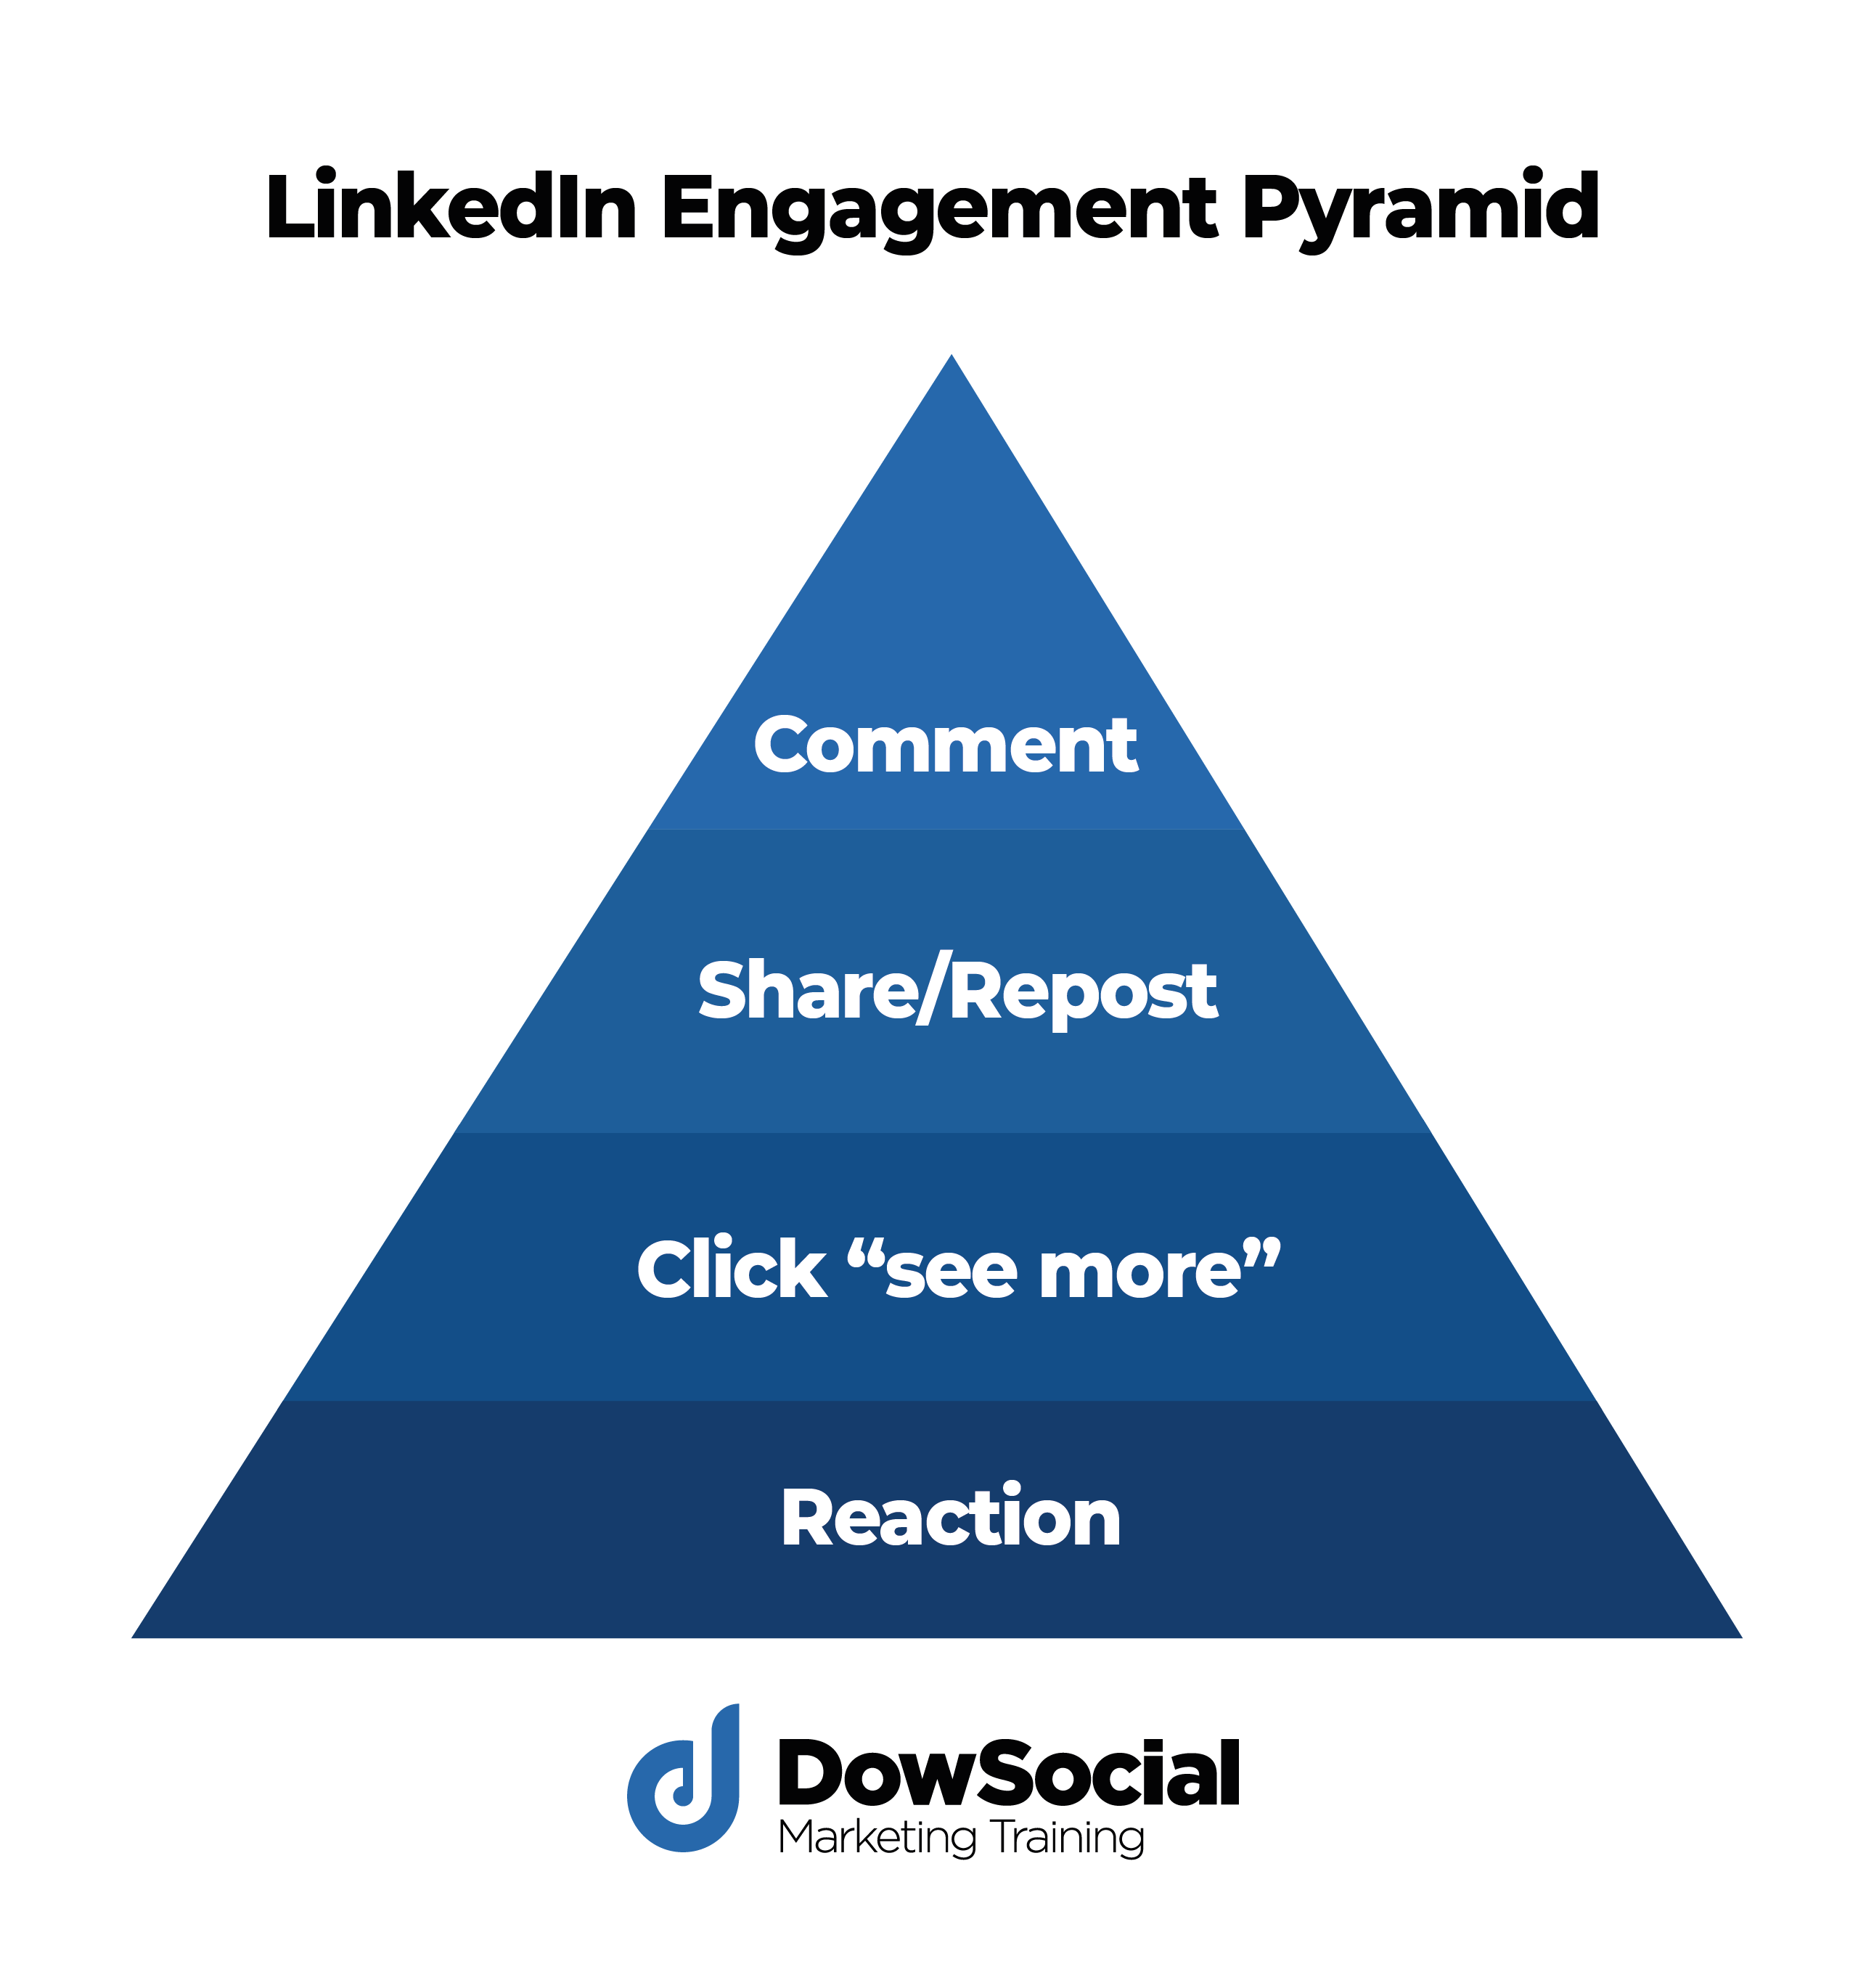 Using The LinkedIn Engagement Pyramid To Maximise Your Post Reach